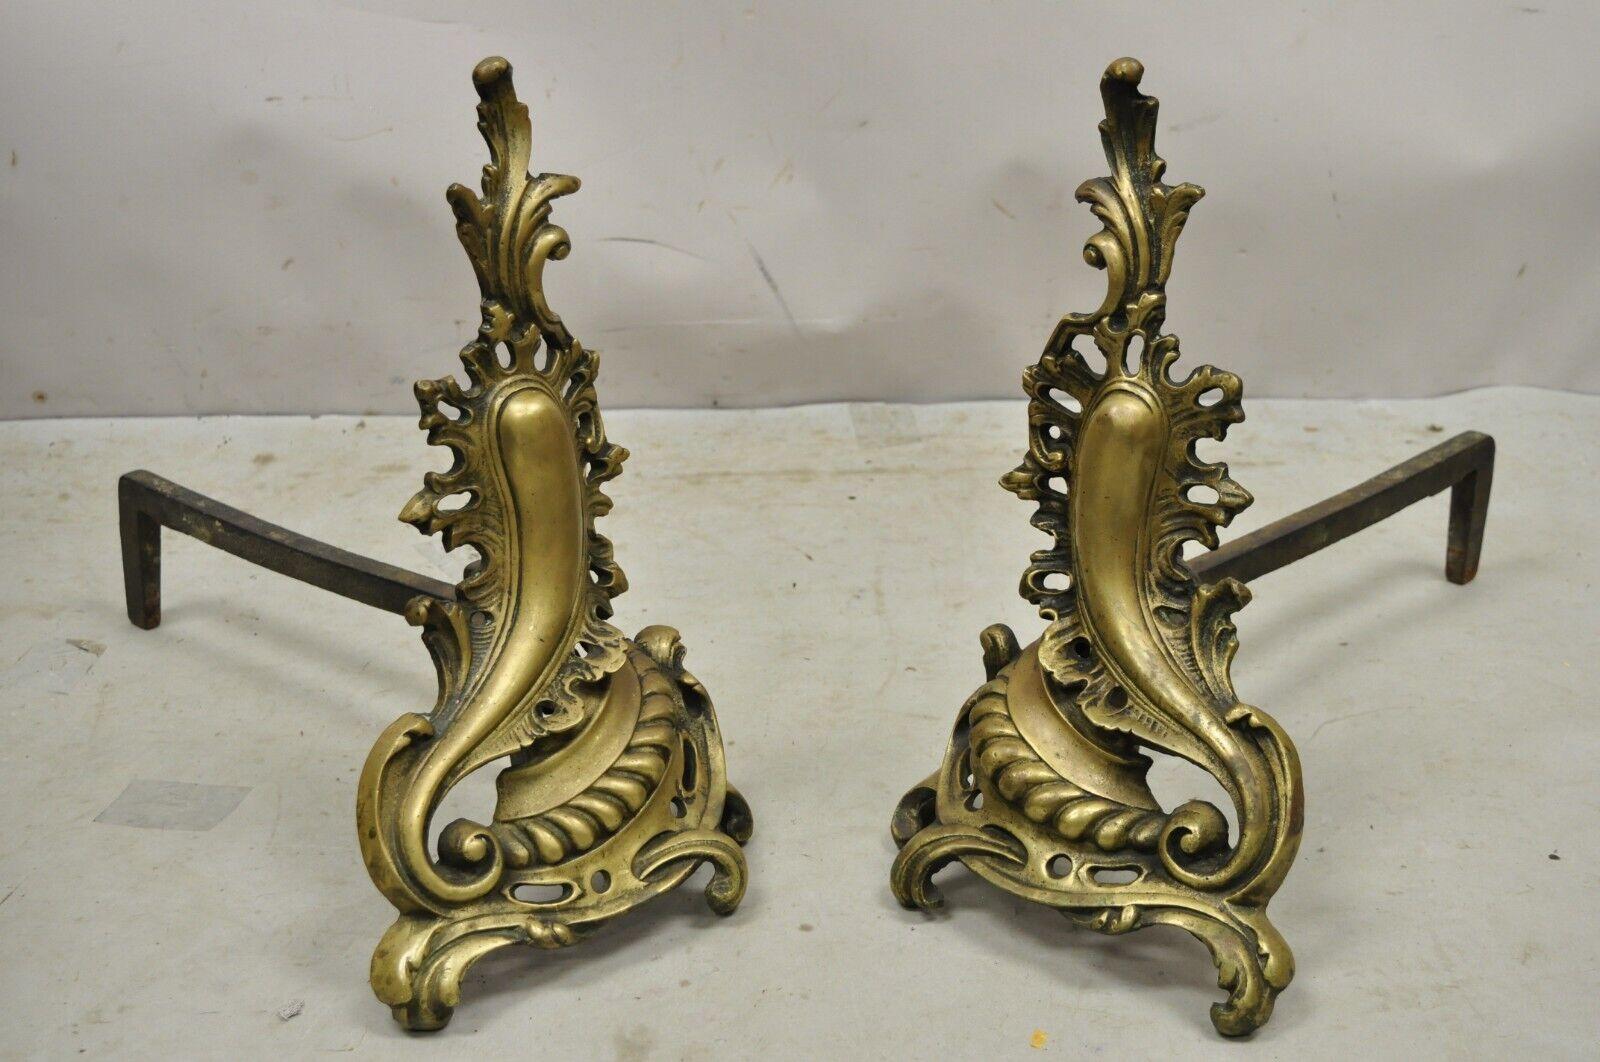 Antique French Rococo Baroque Style Brass Leafy Acanthus Andirons - a Pair. Circa Early 20th Century. Measurements: 17